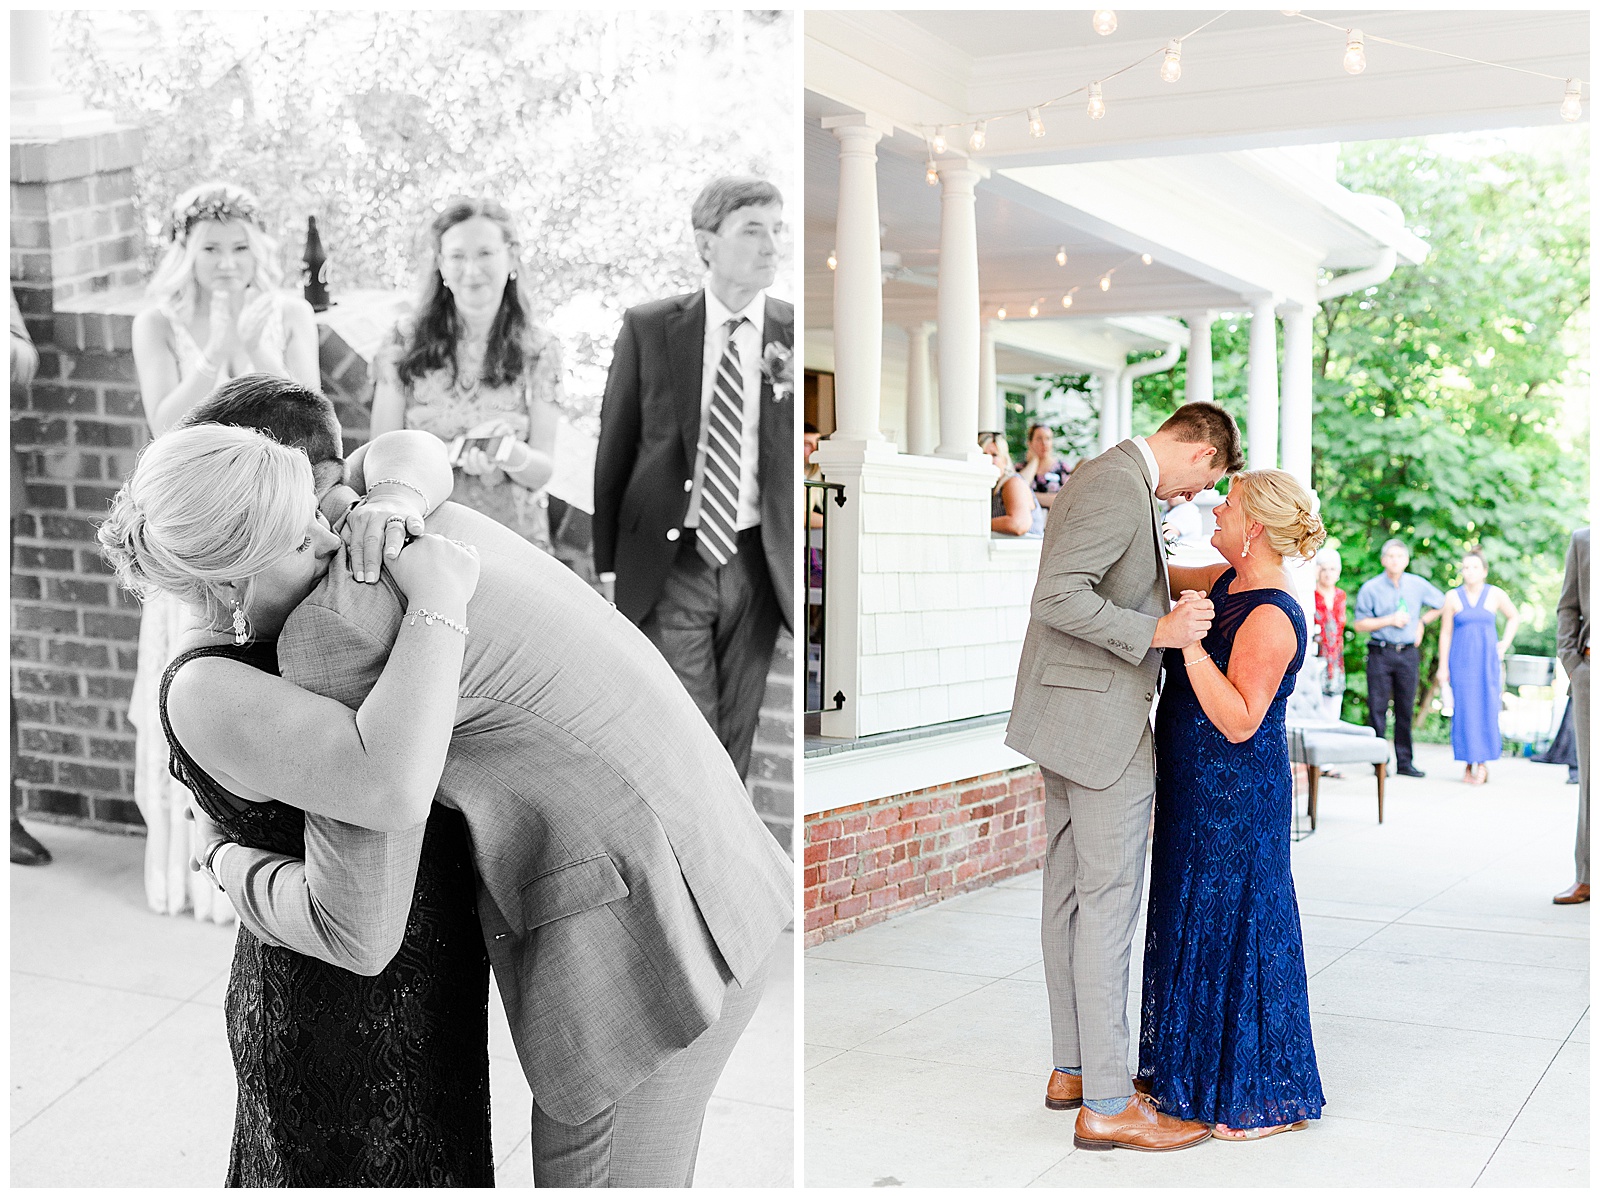 Emotional Bohemian Groom and Mom Mother-Son dance from Boho Chic Summer Wedding in Charlotte, NC | check out the full wedding at KevynDixonPhoto.com